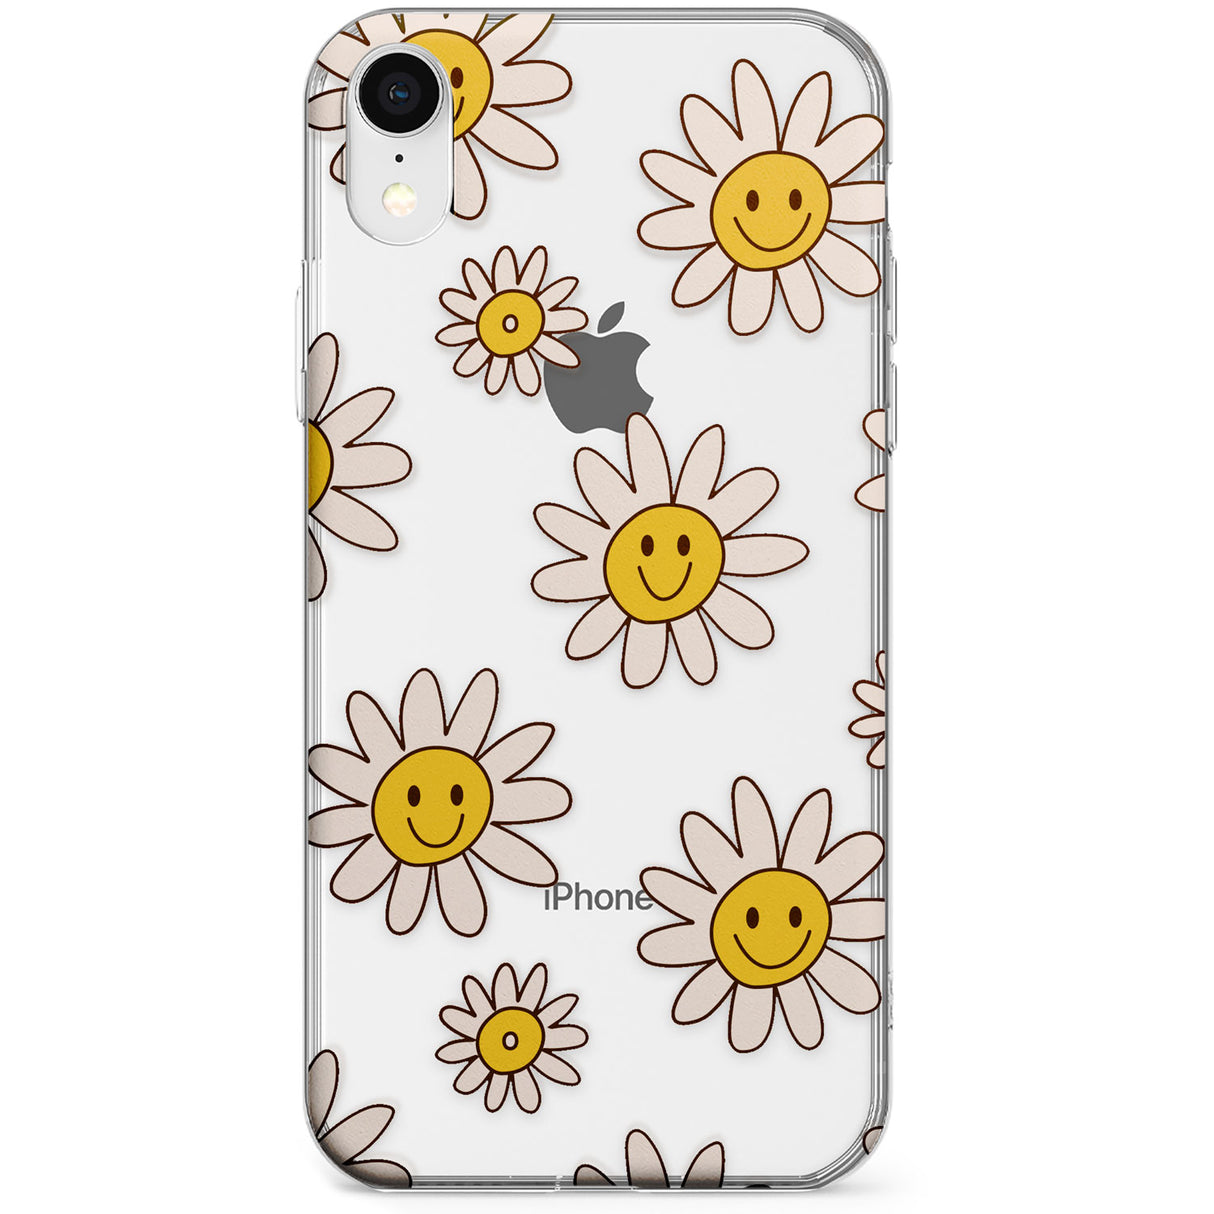 Daisy Faces Phone Case for iPhone X, XS Max, XR